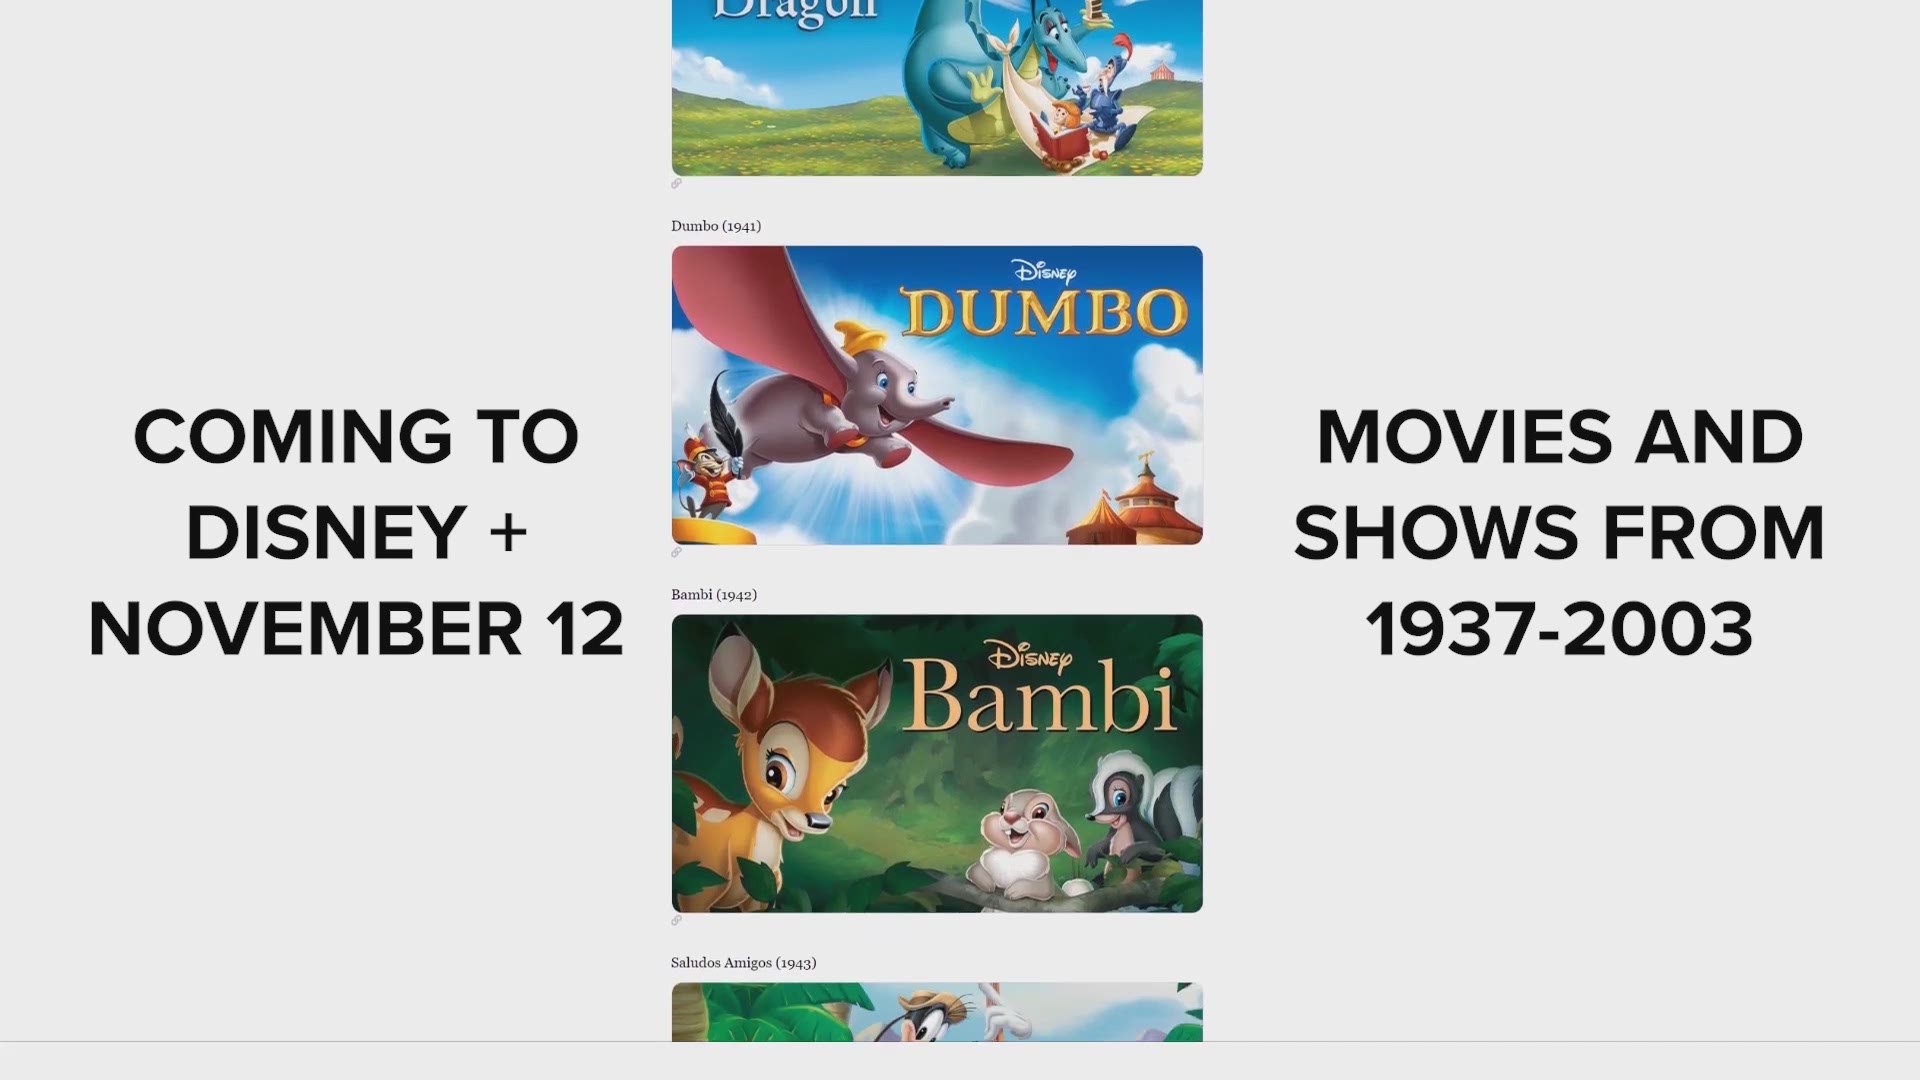 A sampling of the hundreds of shows and movies that will be available on Disney's streaming service when it launches November 12.